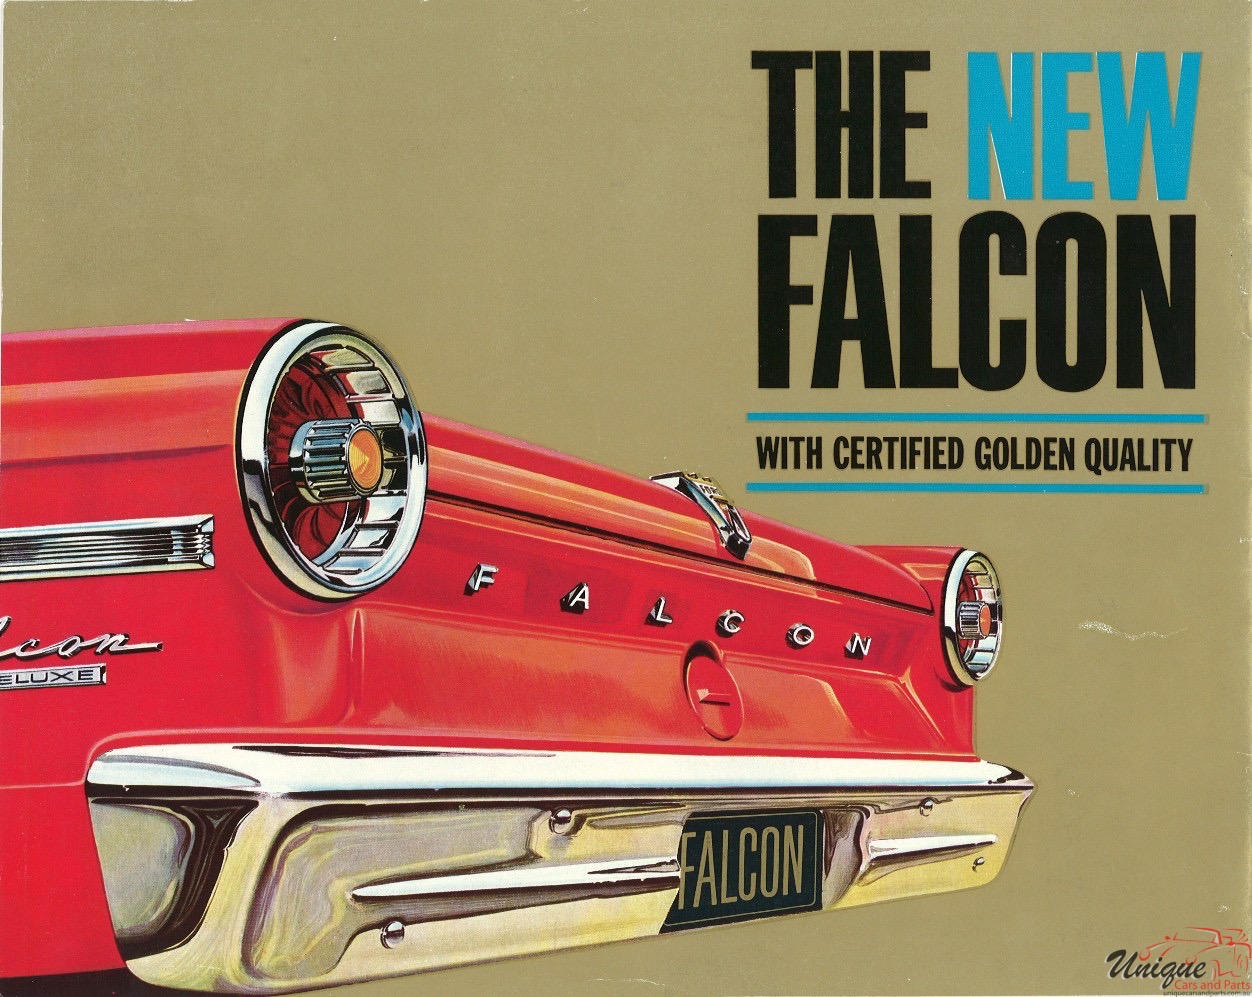 1964 Ford XM Falcon DeLuxe Brochure Page 2